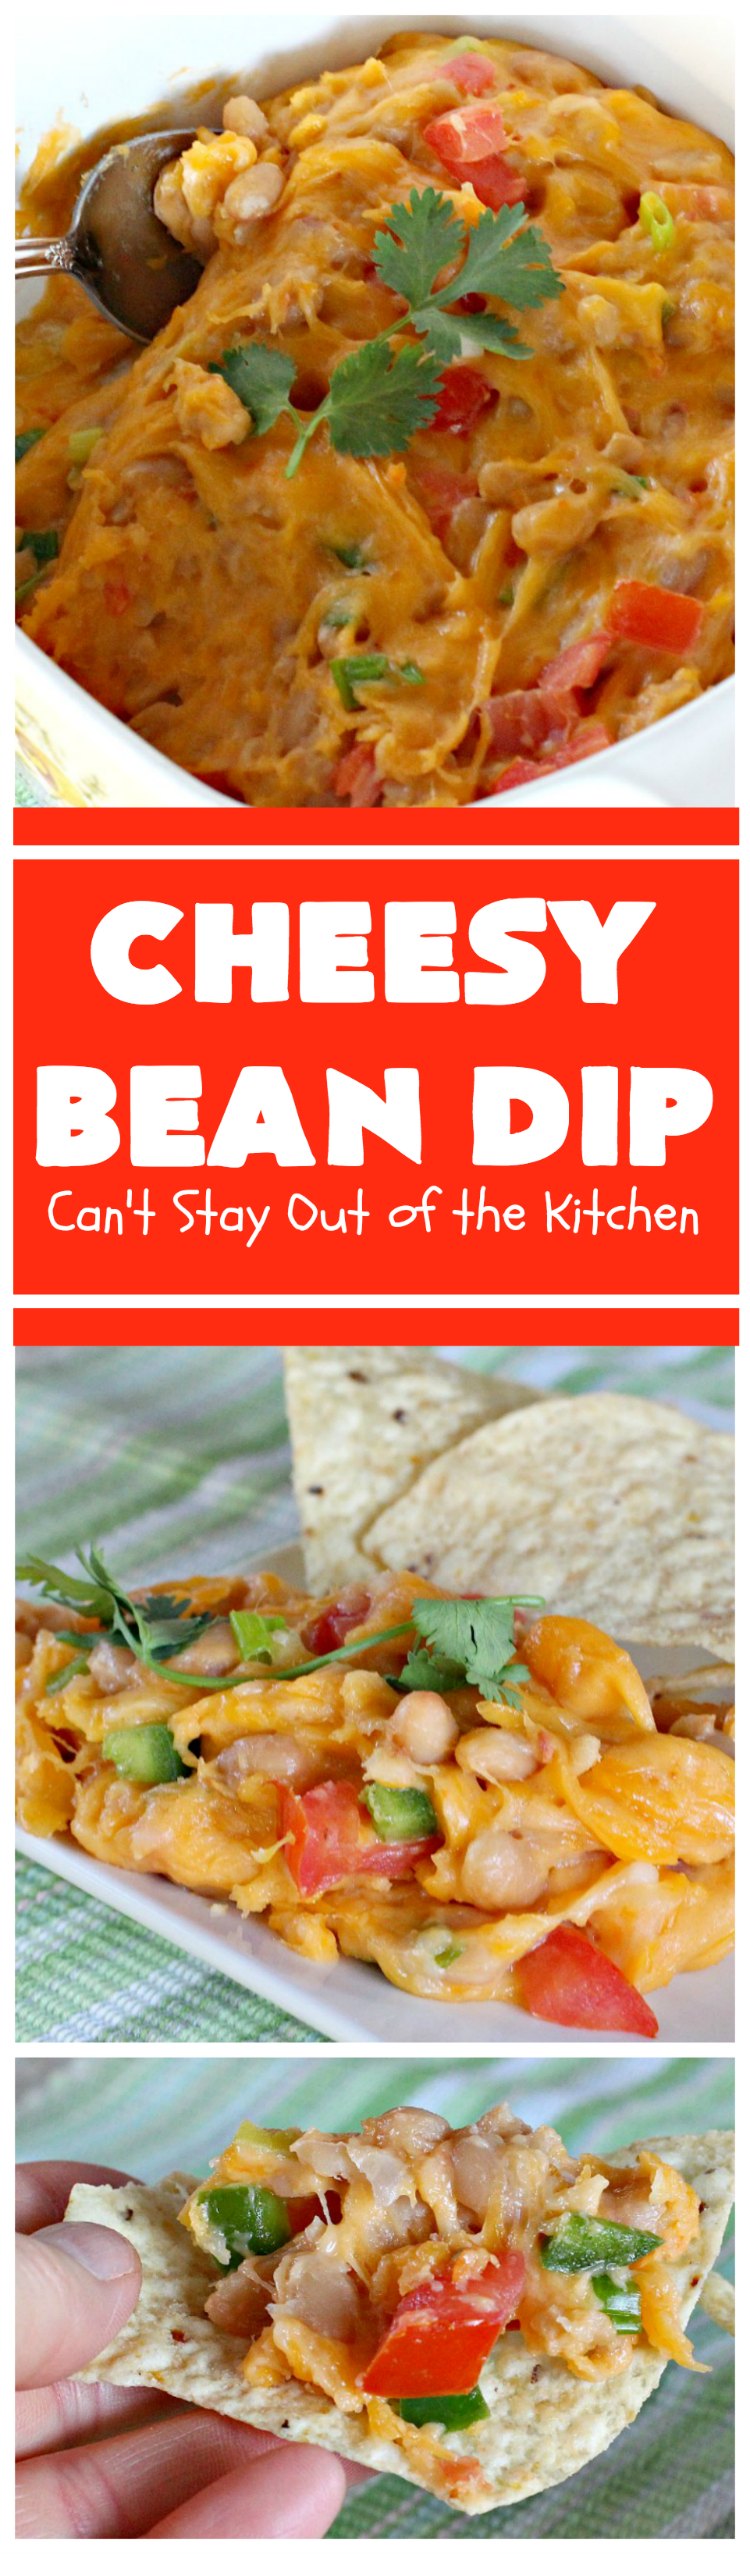 Cheesy Bean Dip | Can't Stay Out of the Kitchen